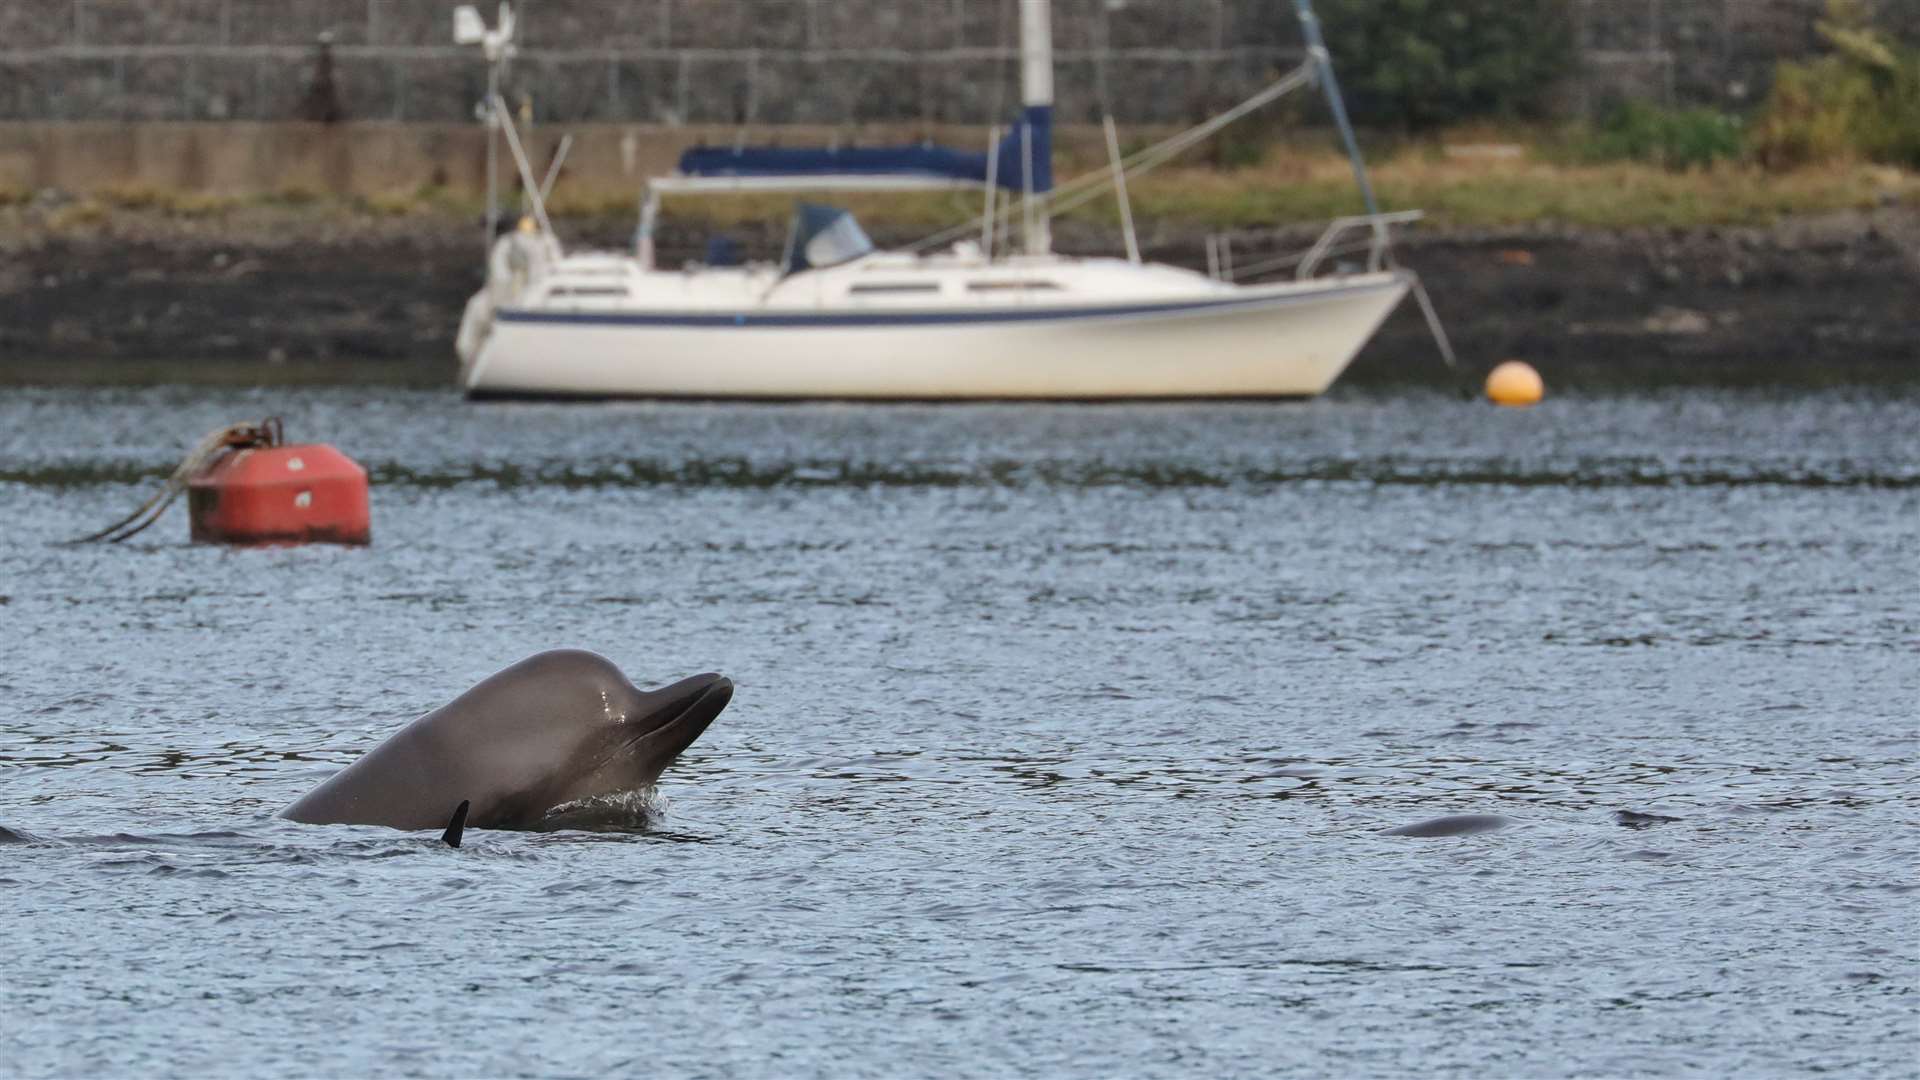 The whales have been spotted in the Clyde (Steve Truluk/PA)